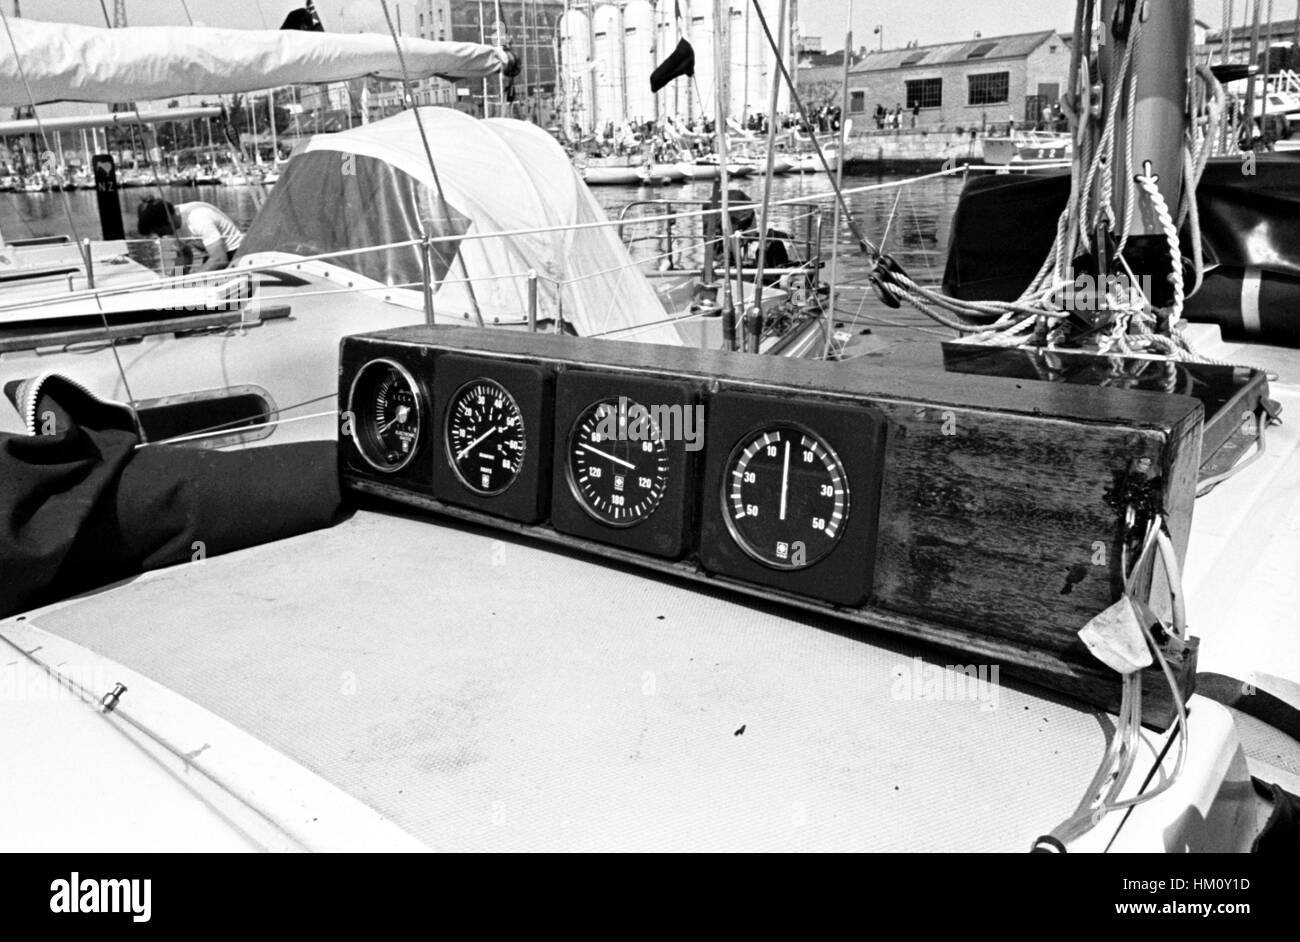 AJAXNETPHOTO. 5TH JUNE, 1976. PLYMOUTH, ENGLAND. - OSTAR 1976 - NAVIGATING INSTRUMENTS ON GERMAN ENTRY LILLIAM SKIPPERED BY KLAUS SCHRODT.   PHOTO:JONATHAN EASTLAND/AJAX REF:2760506 11A Stock Photo